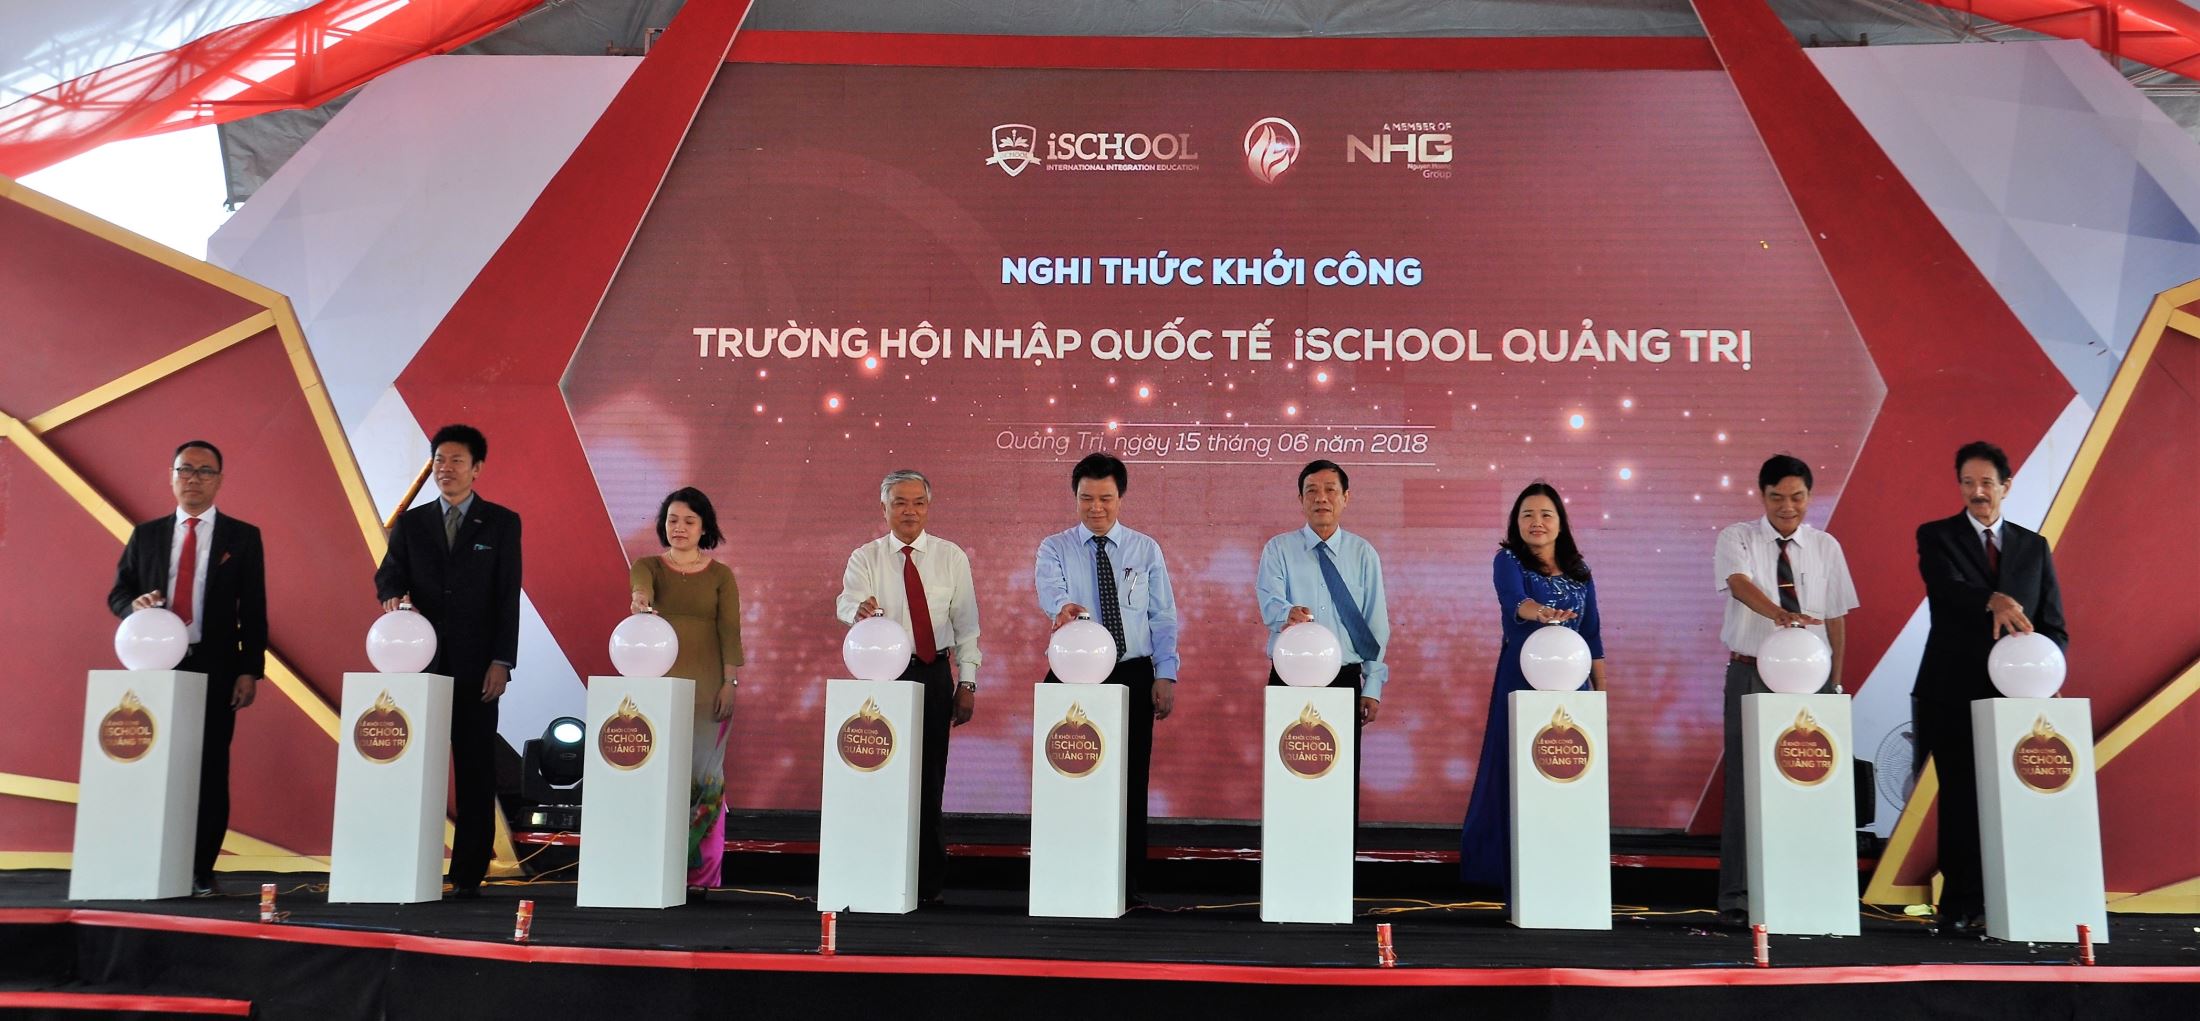 Dr. Nguyen Huu Do - Vice Minister of Education & Training, along with Representatives of Quang Tri province, Nguyen Hoang Group, and iSchool system, performed the commencement ceremony together.